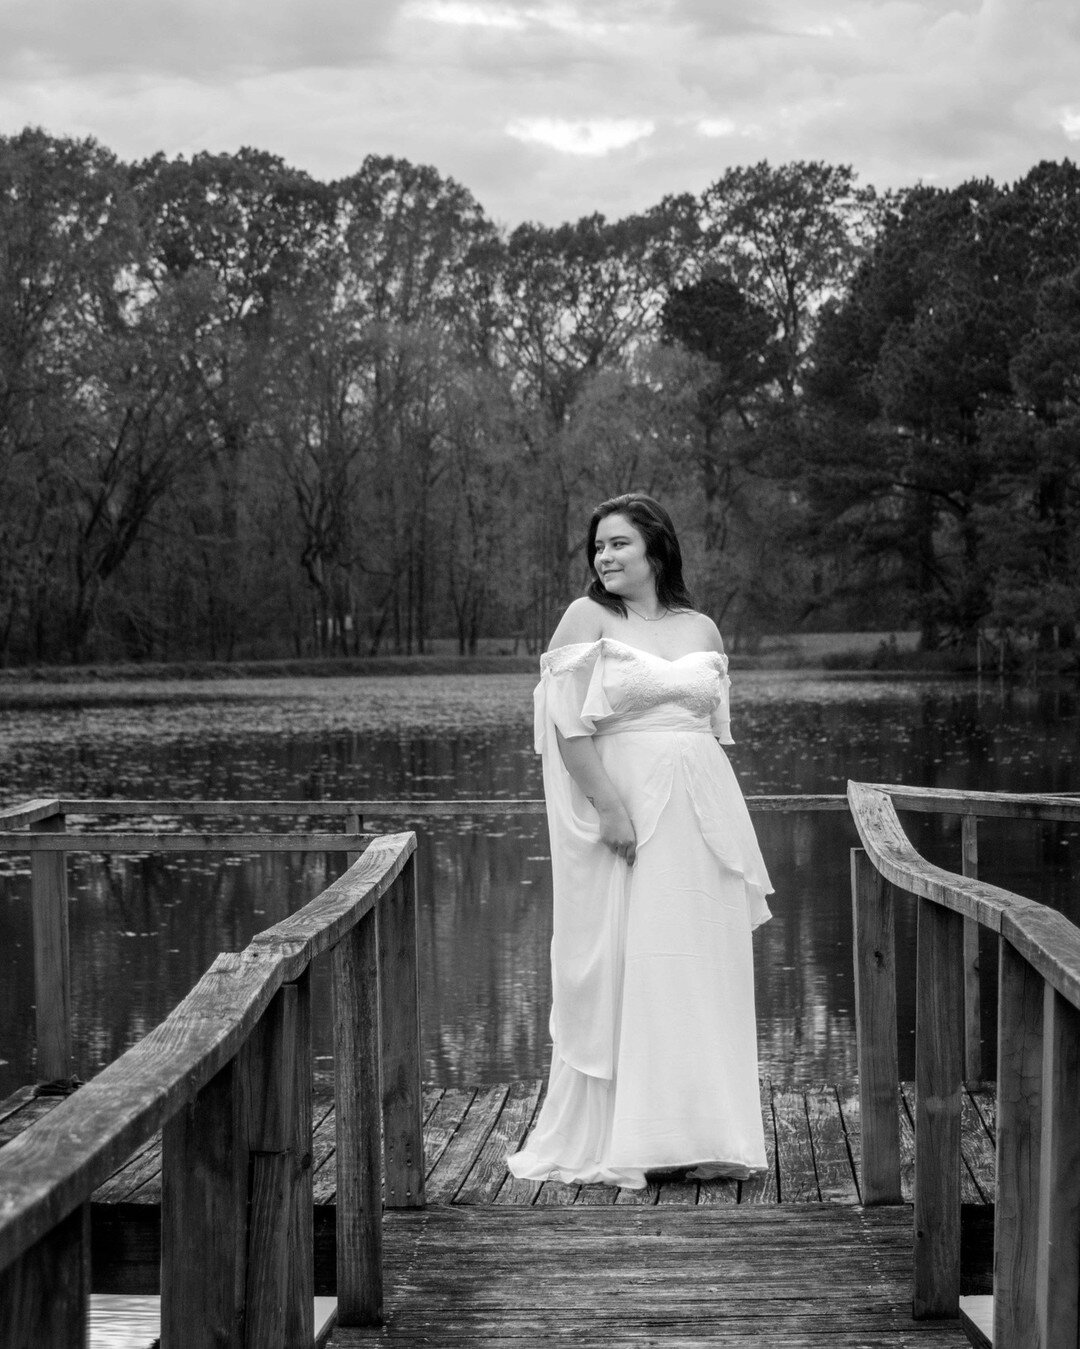 Cheyenne on the Dock

Swipe to view the color version :)

&copy;2020 @joannamichelleharris

#photography #901photographer #loveart #downtownmemphis #choose901 #fashionphotography #ilovememphisblog #memphisphotographer #portraits #portrait #countrypho